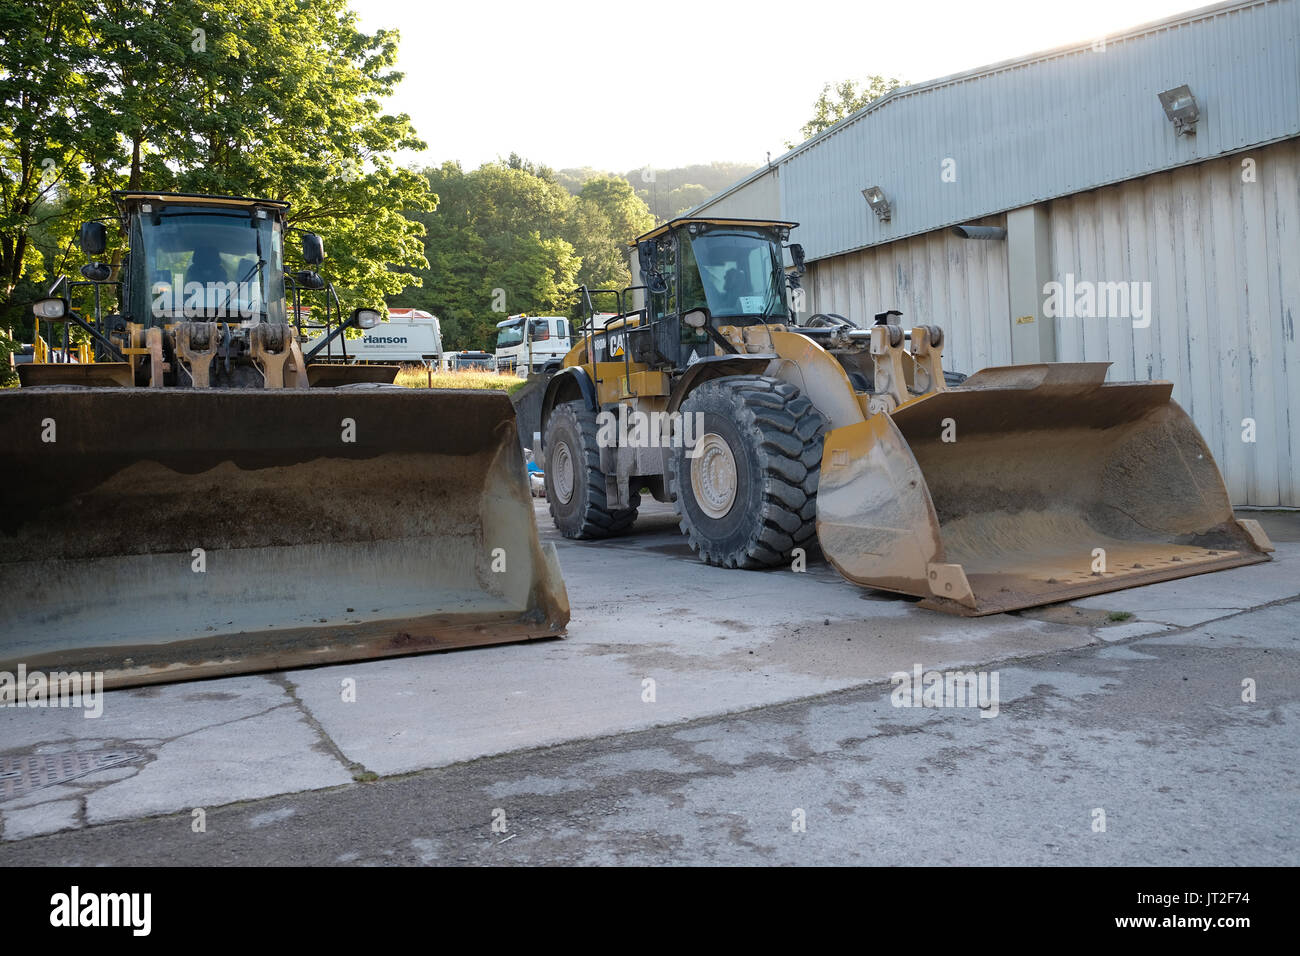 6th August 2017 - Large front end loader shovels parked up at the weekend Stock Photo